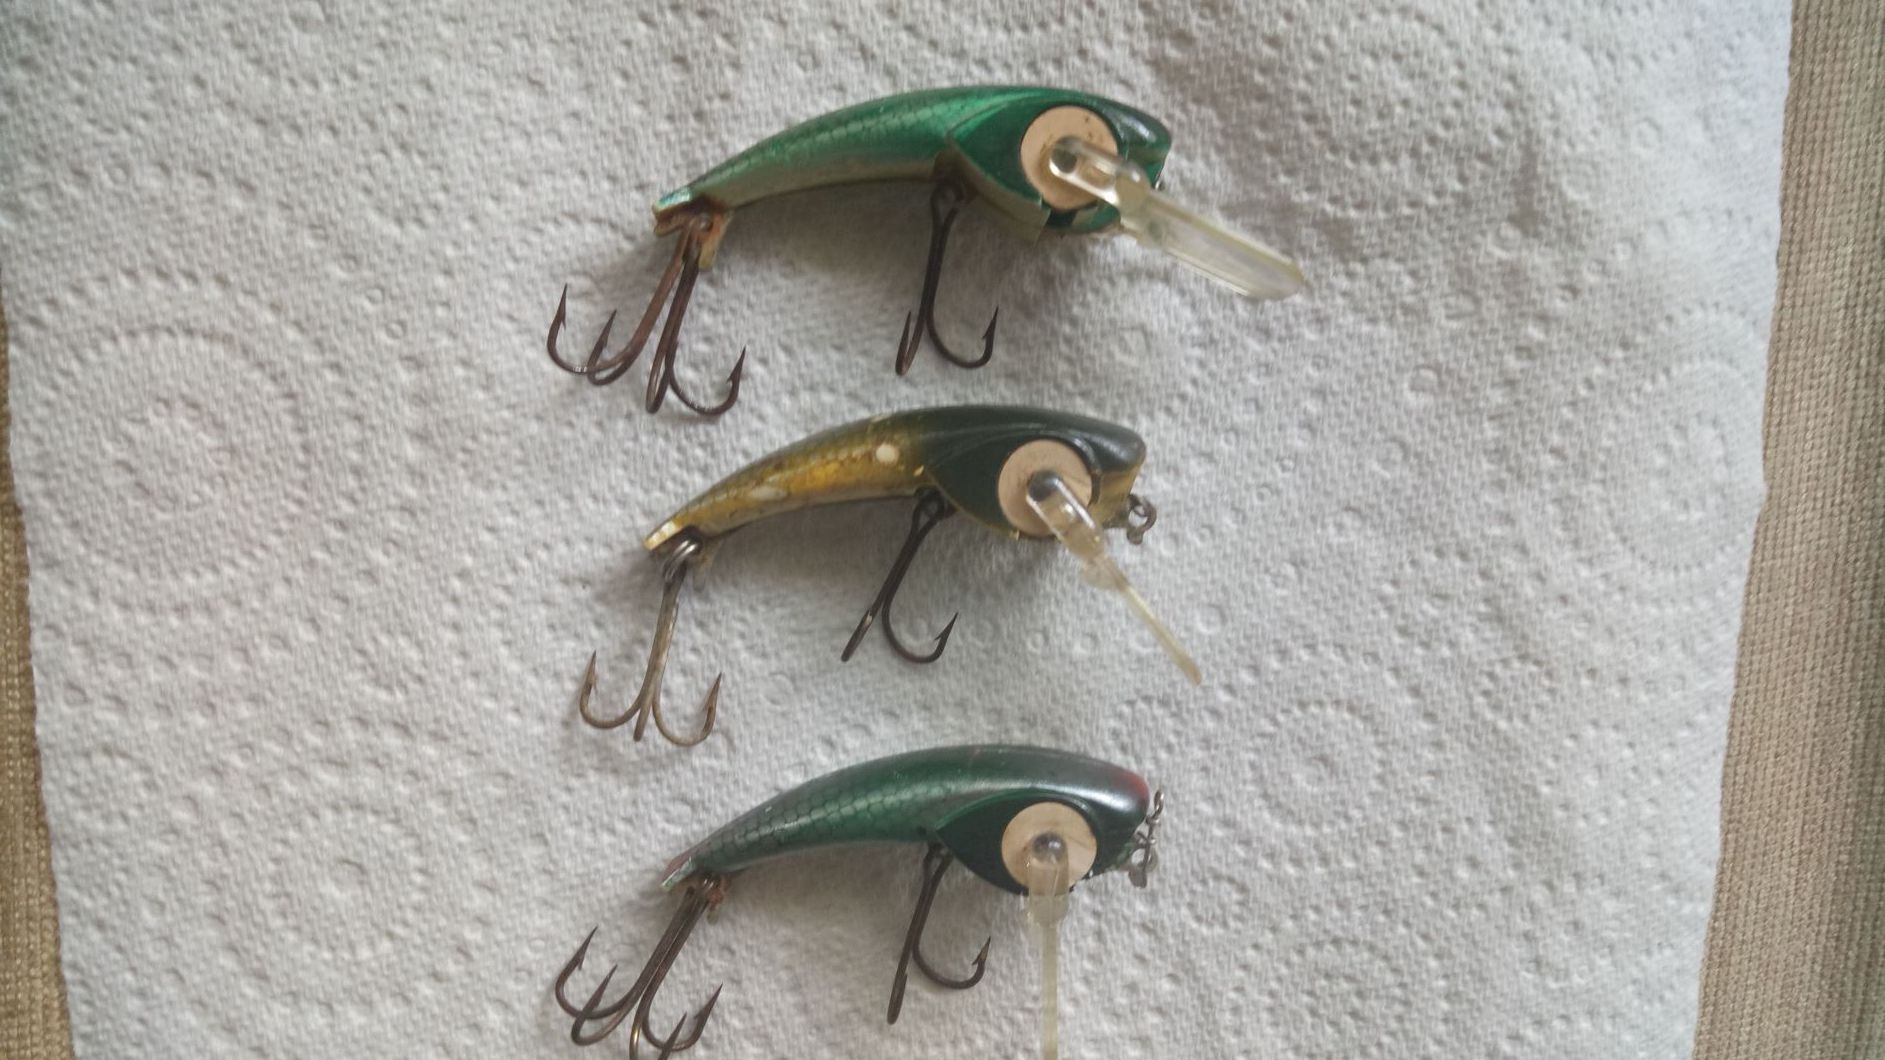 Show us your lure collection - Freshwater Fishing Chat - DECKEE Community